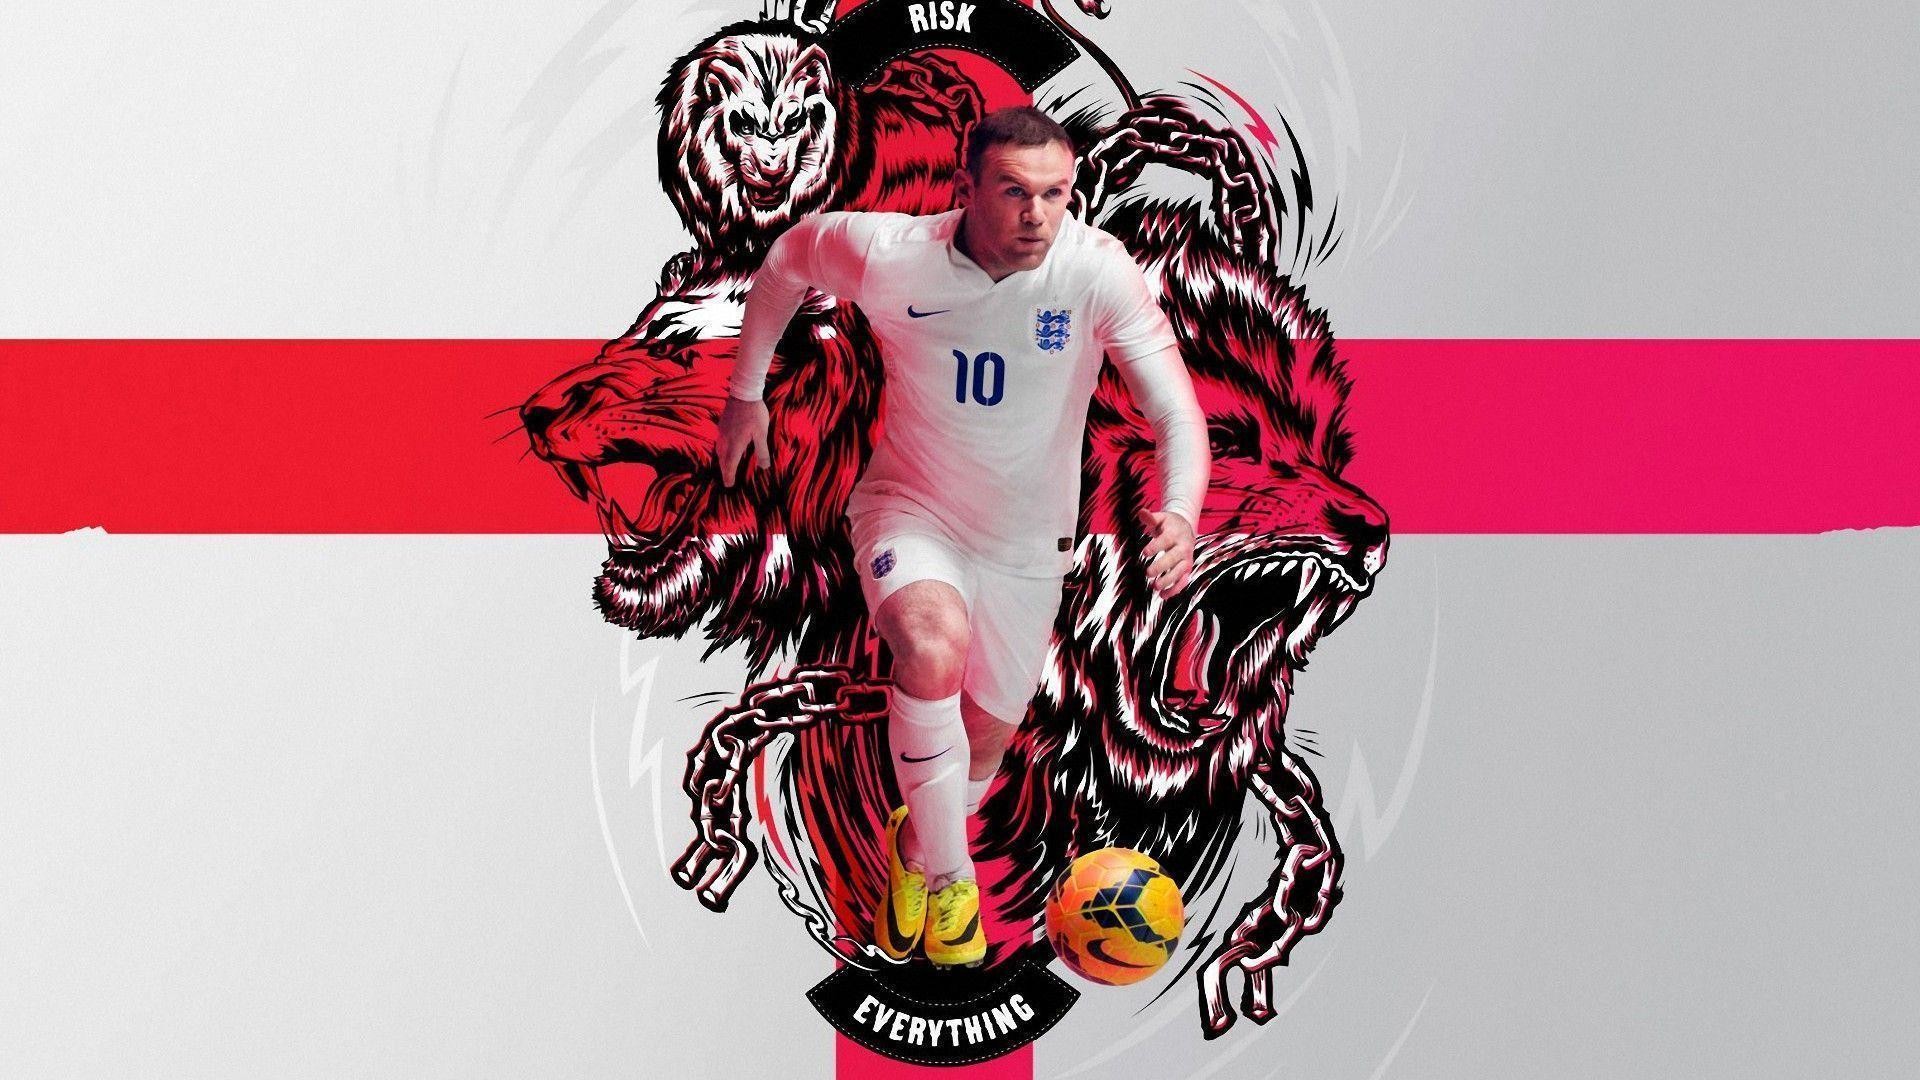 1920x1080 Rooney 2014 England Nike Risk Everything Wallpaper Wide or HD .